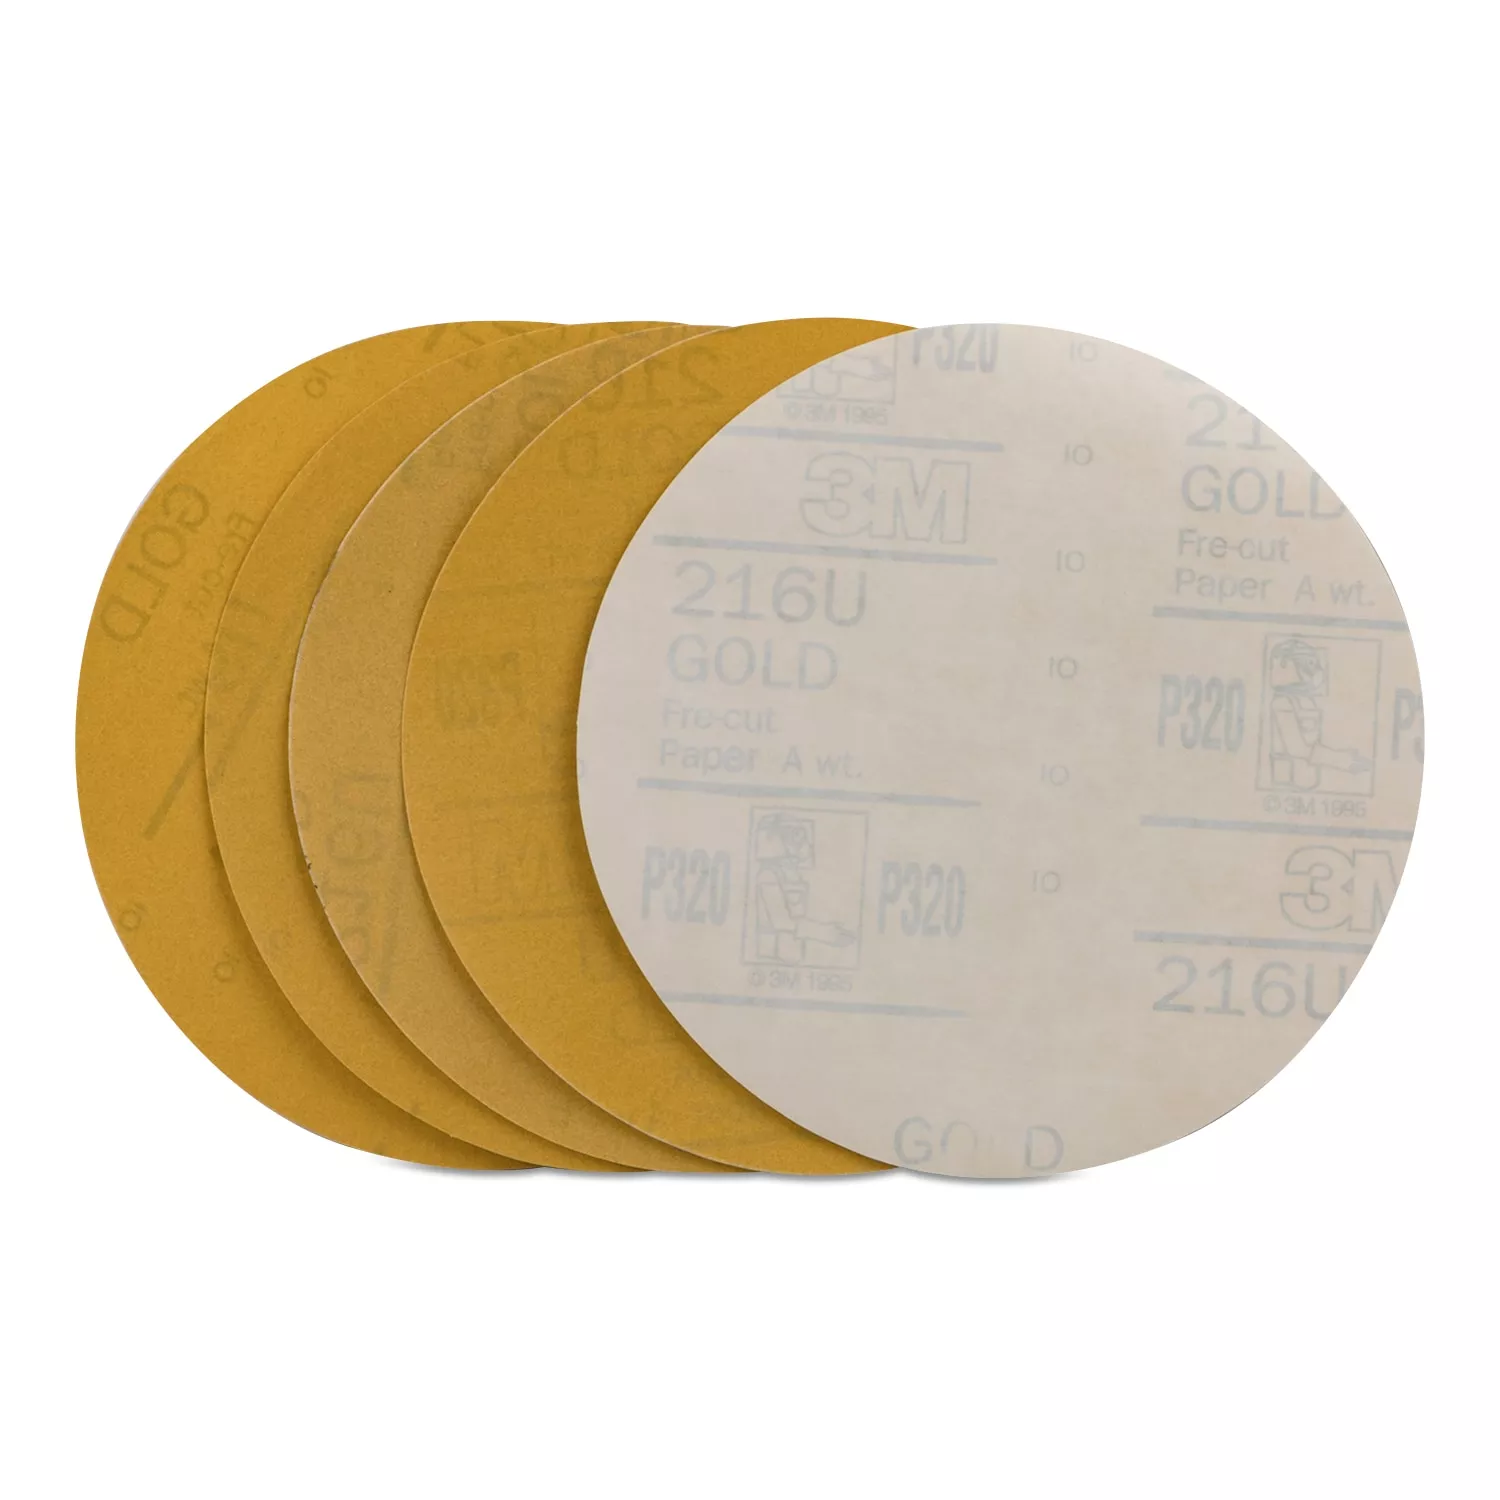 SKU 7010363419 | 3M™ Sanding Discs with Stikit™ Attachment